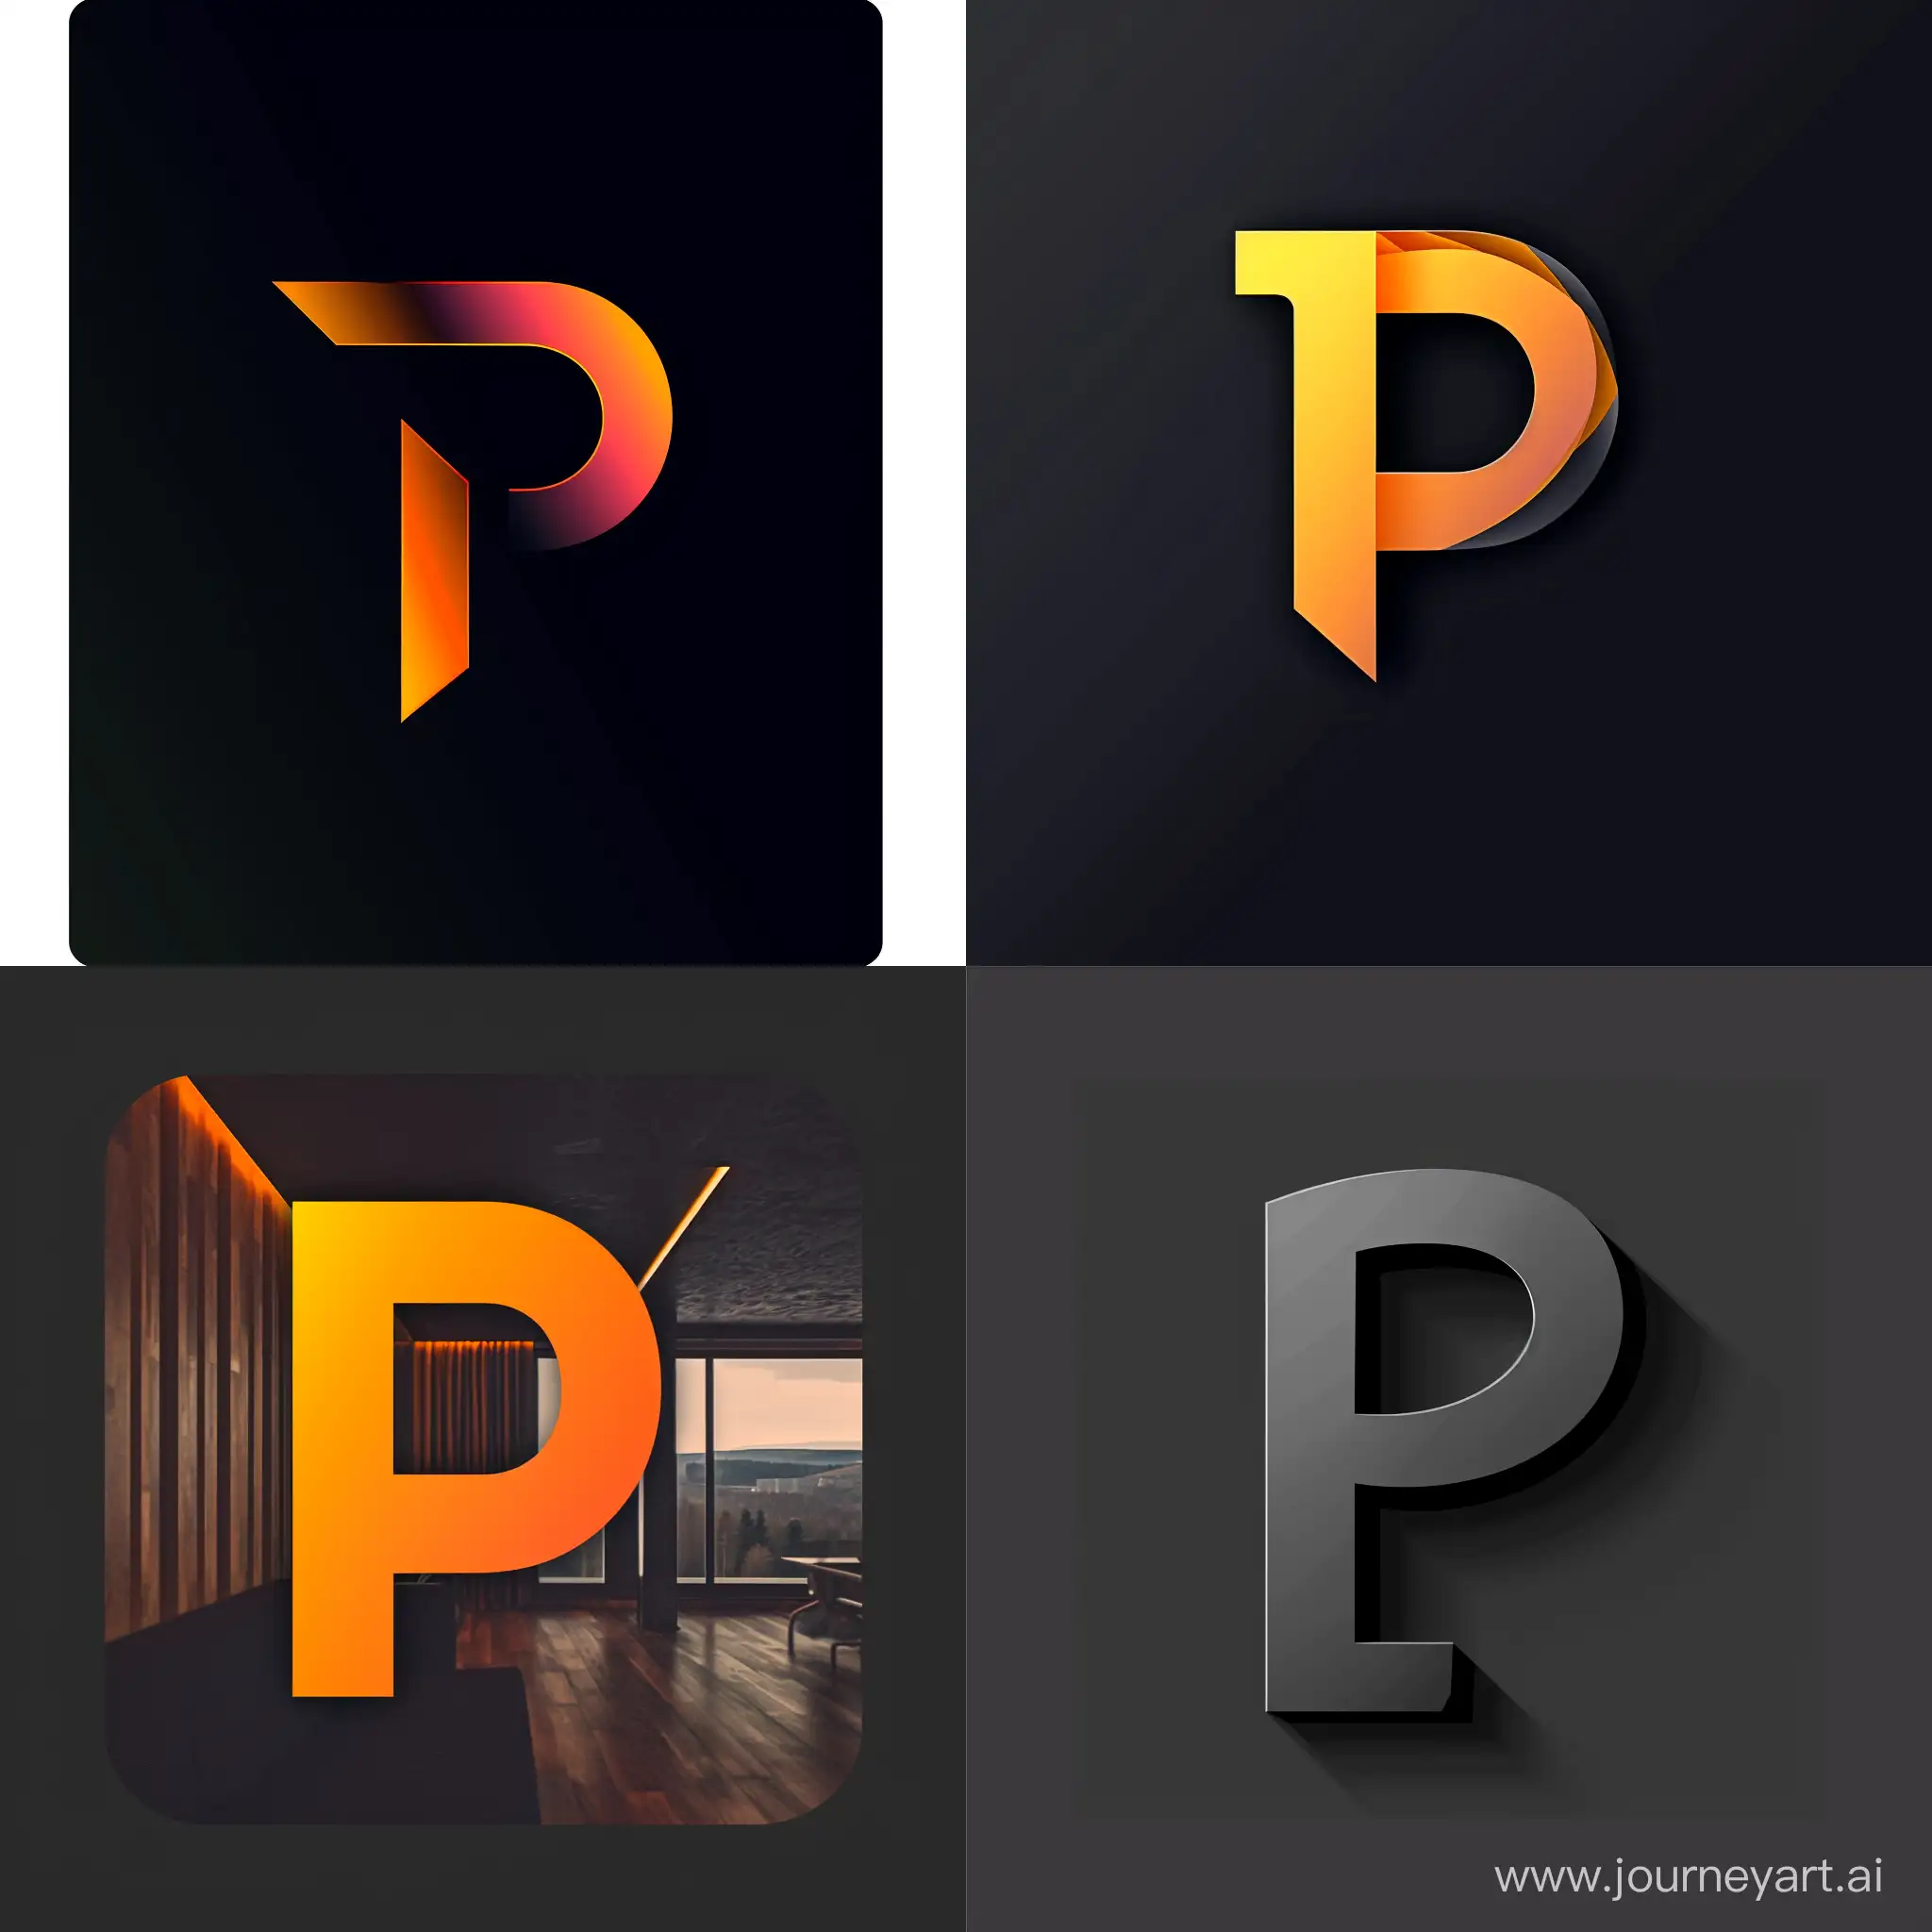 Beautiful logo associated with reliability Plint us VPN in  Fluent Design without text in the images, minimalistic style, logos simplicity, The letter P in the foreground